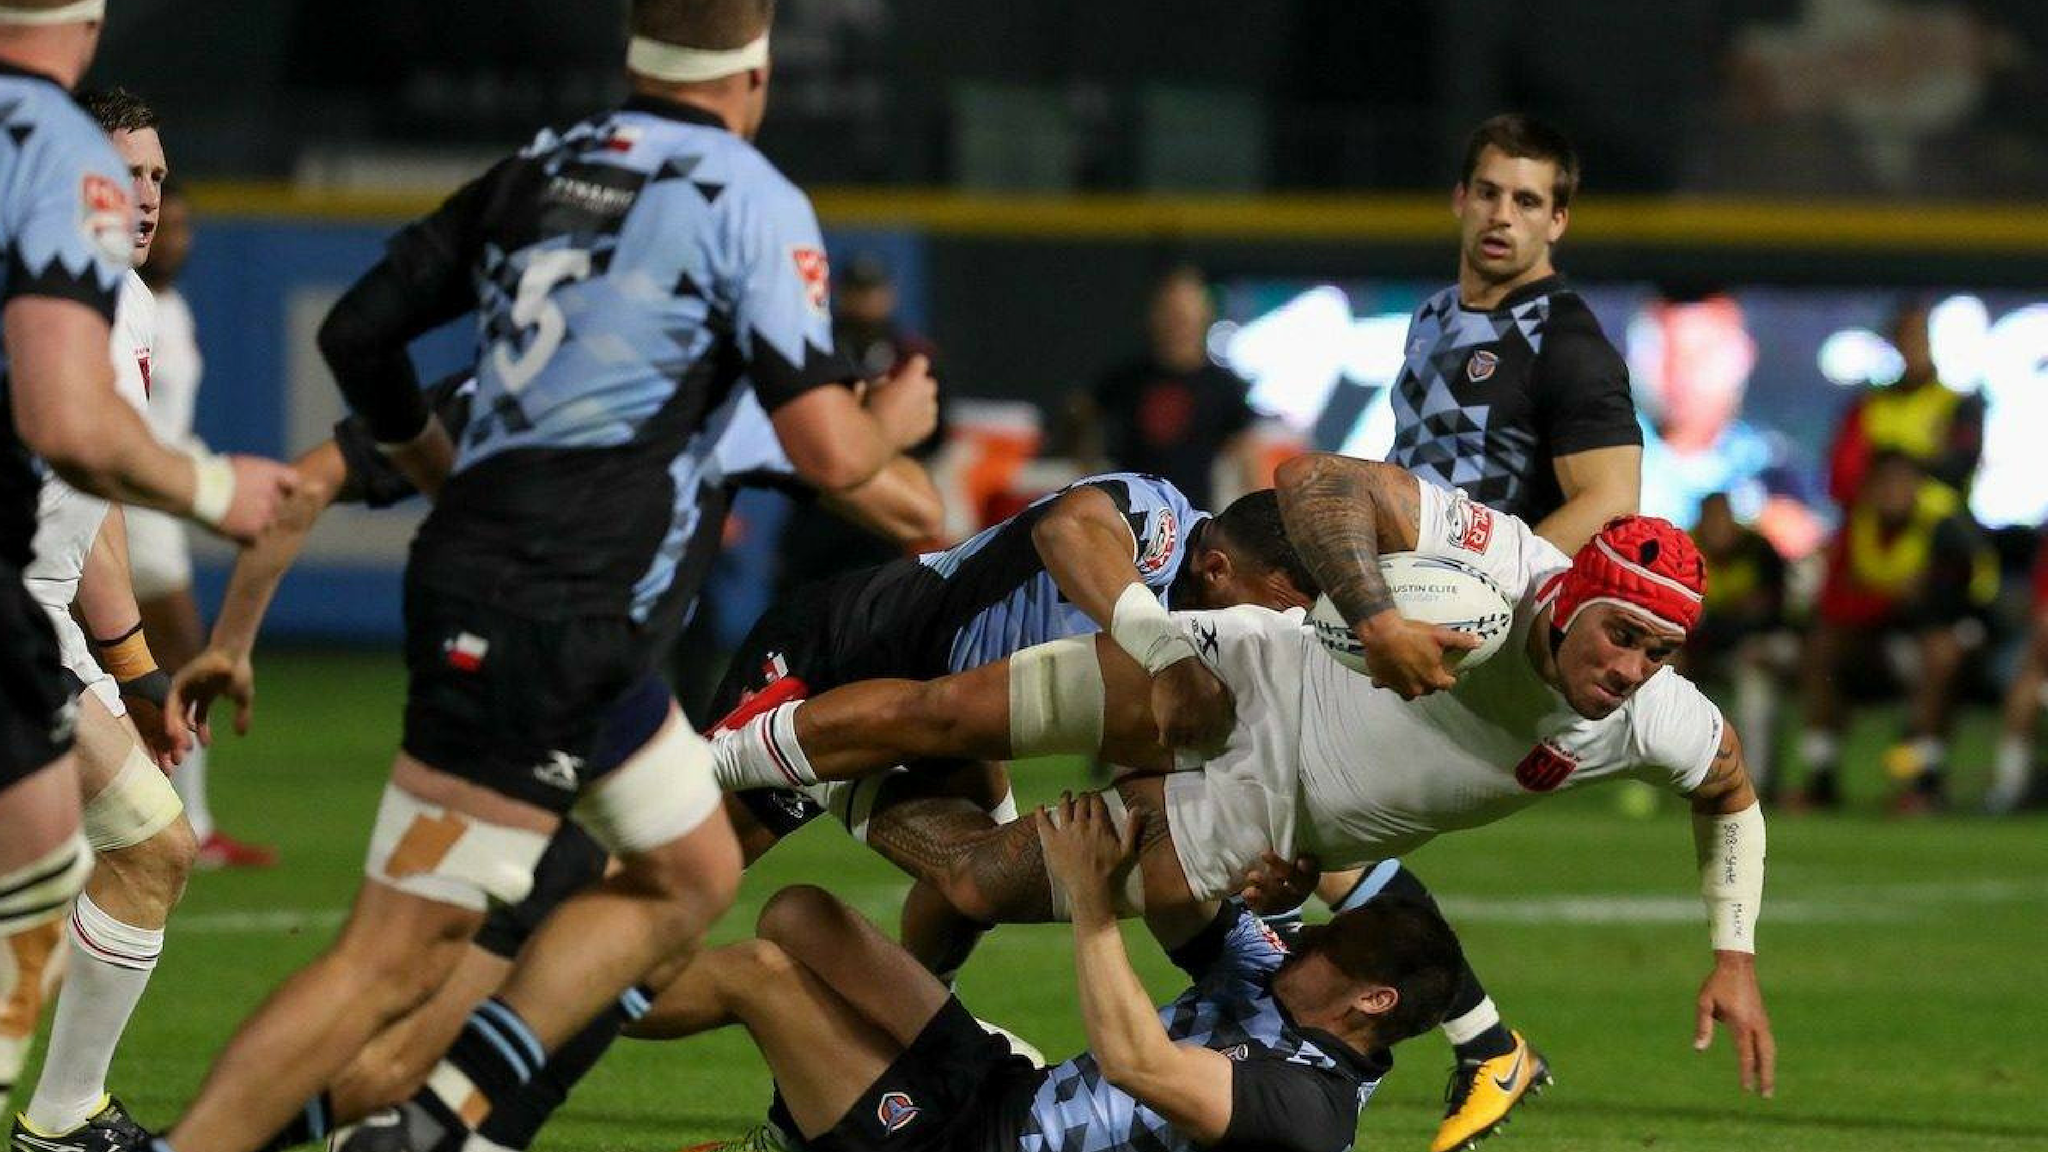 Toyota Field to host Major League Rugby match for first time